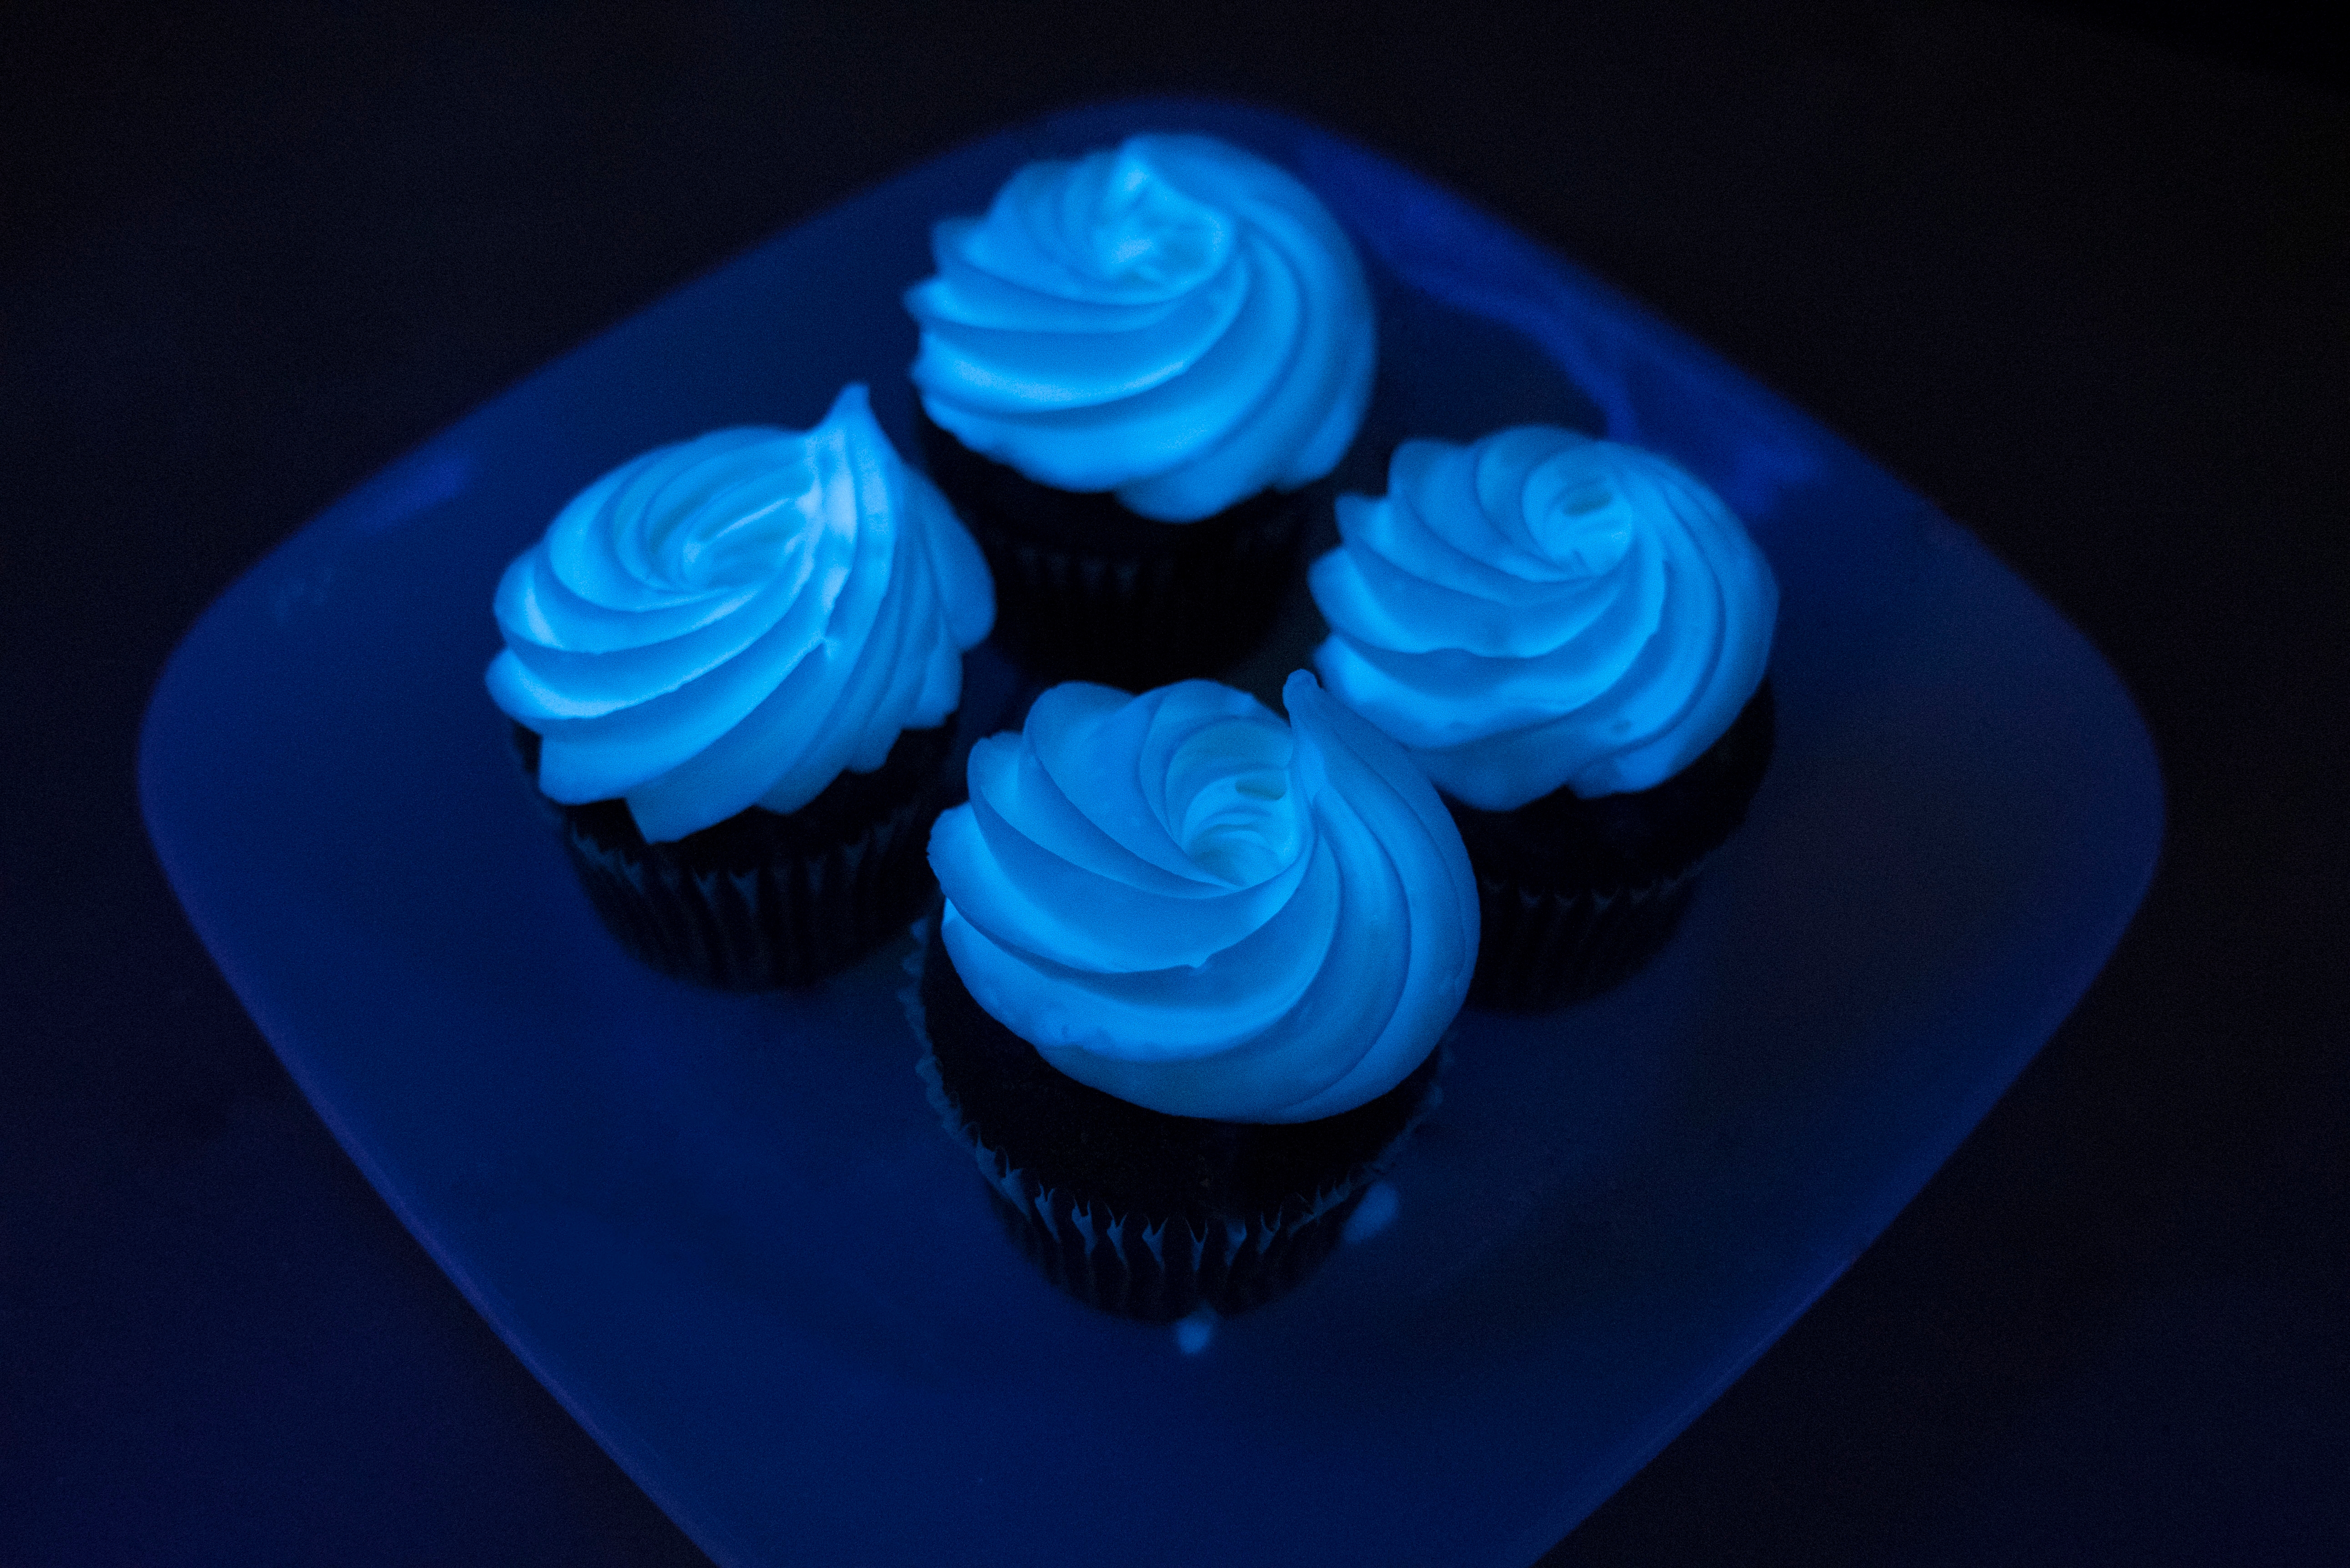 How to Make GLOW-IN-THE-DARK Cupcakes